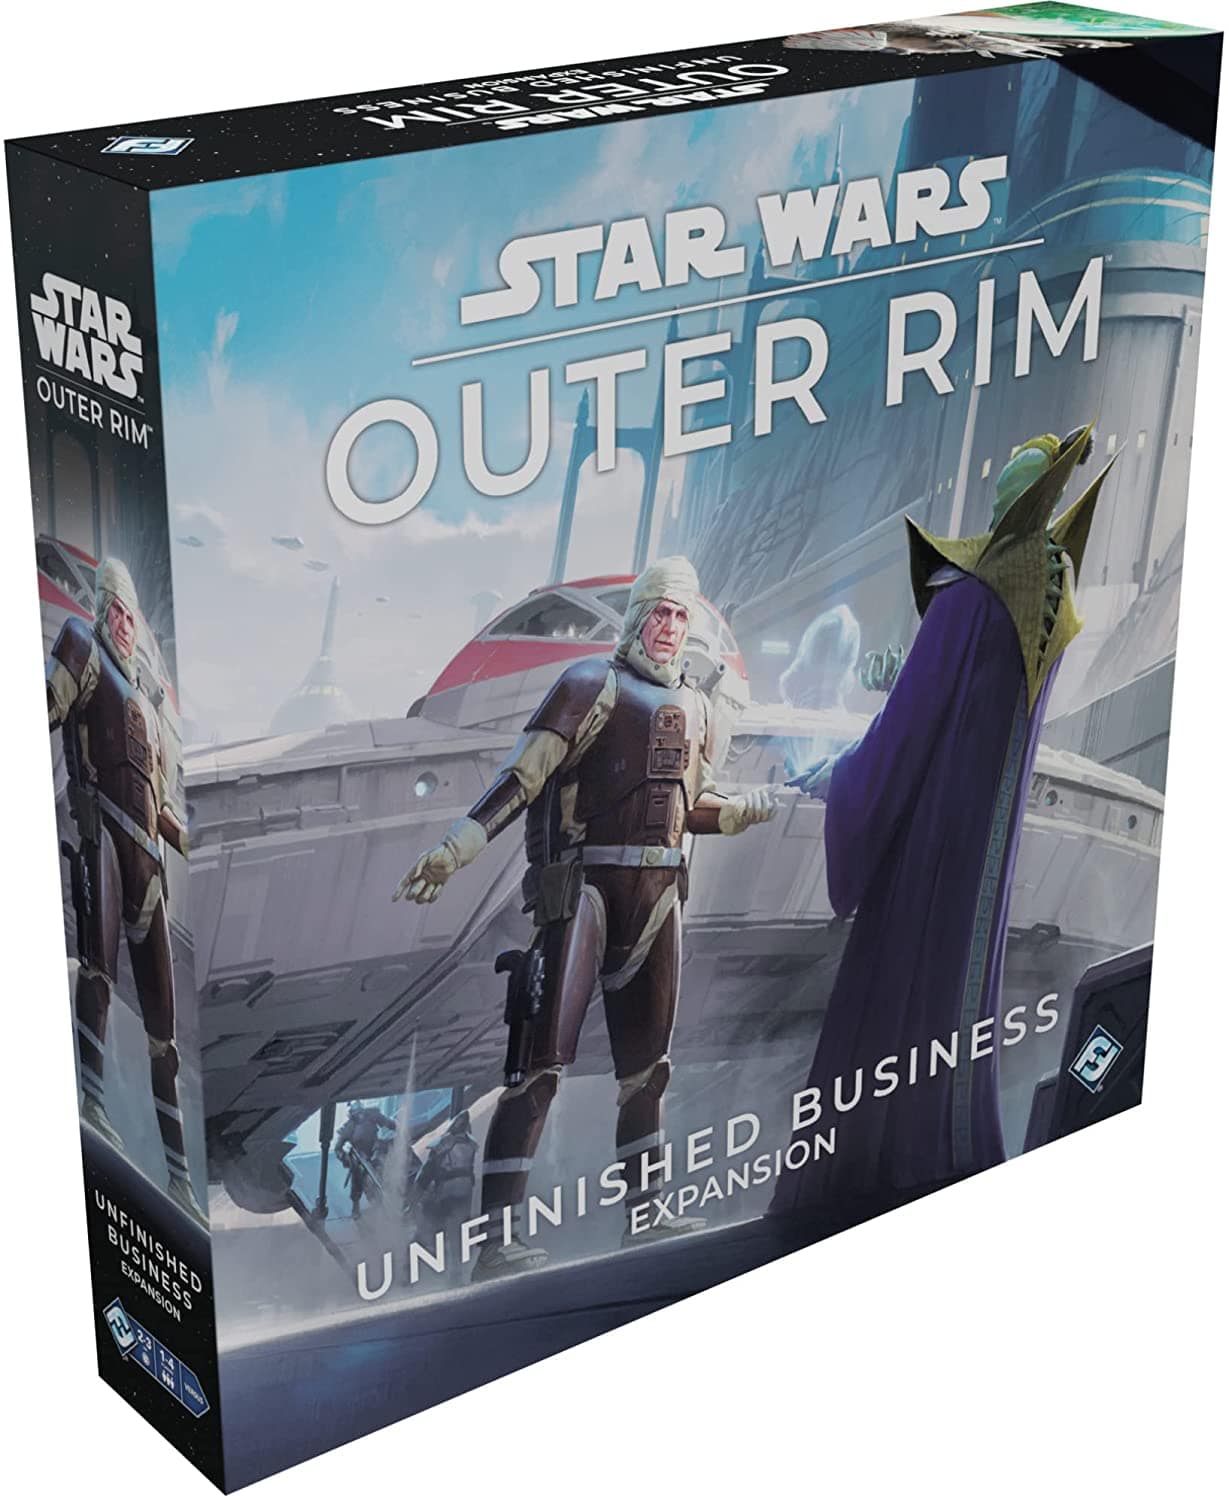 Star Wars - Outer Rim: Unfinished Business Expansion - Third Eye